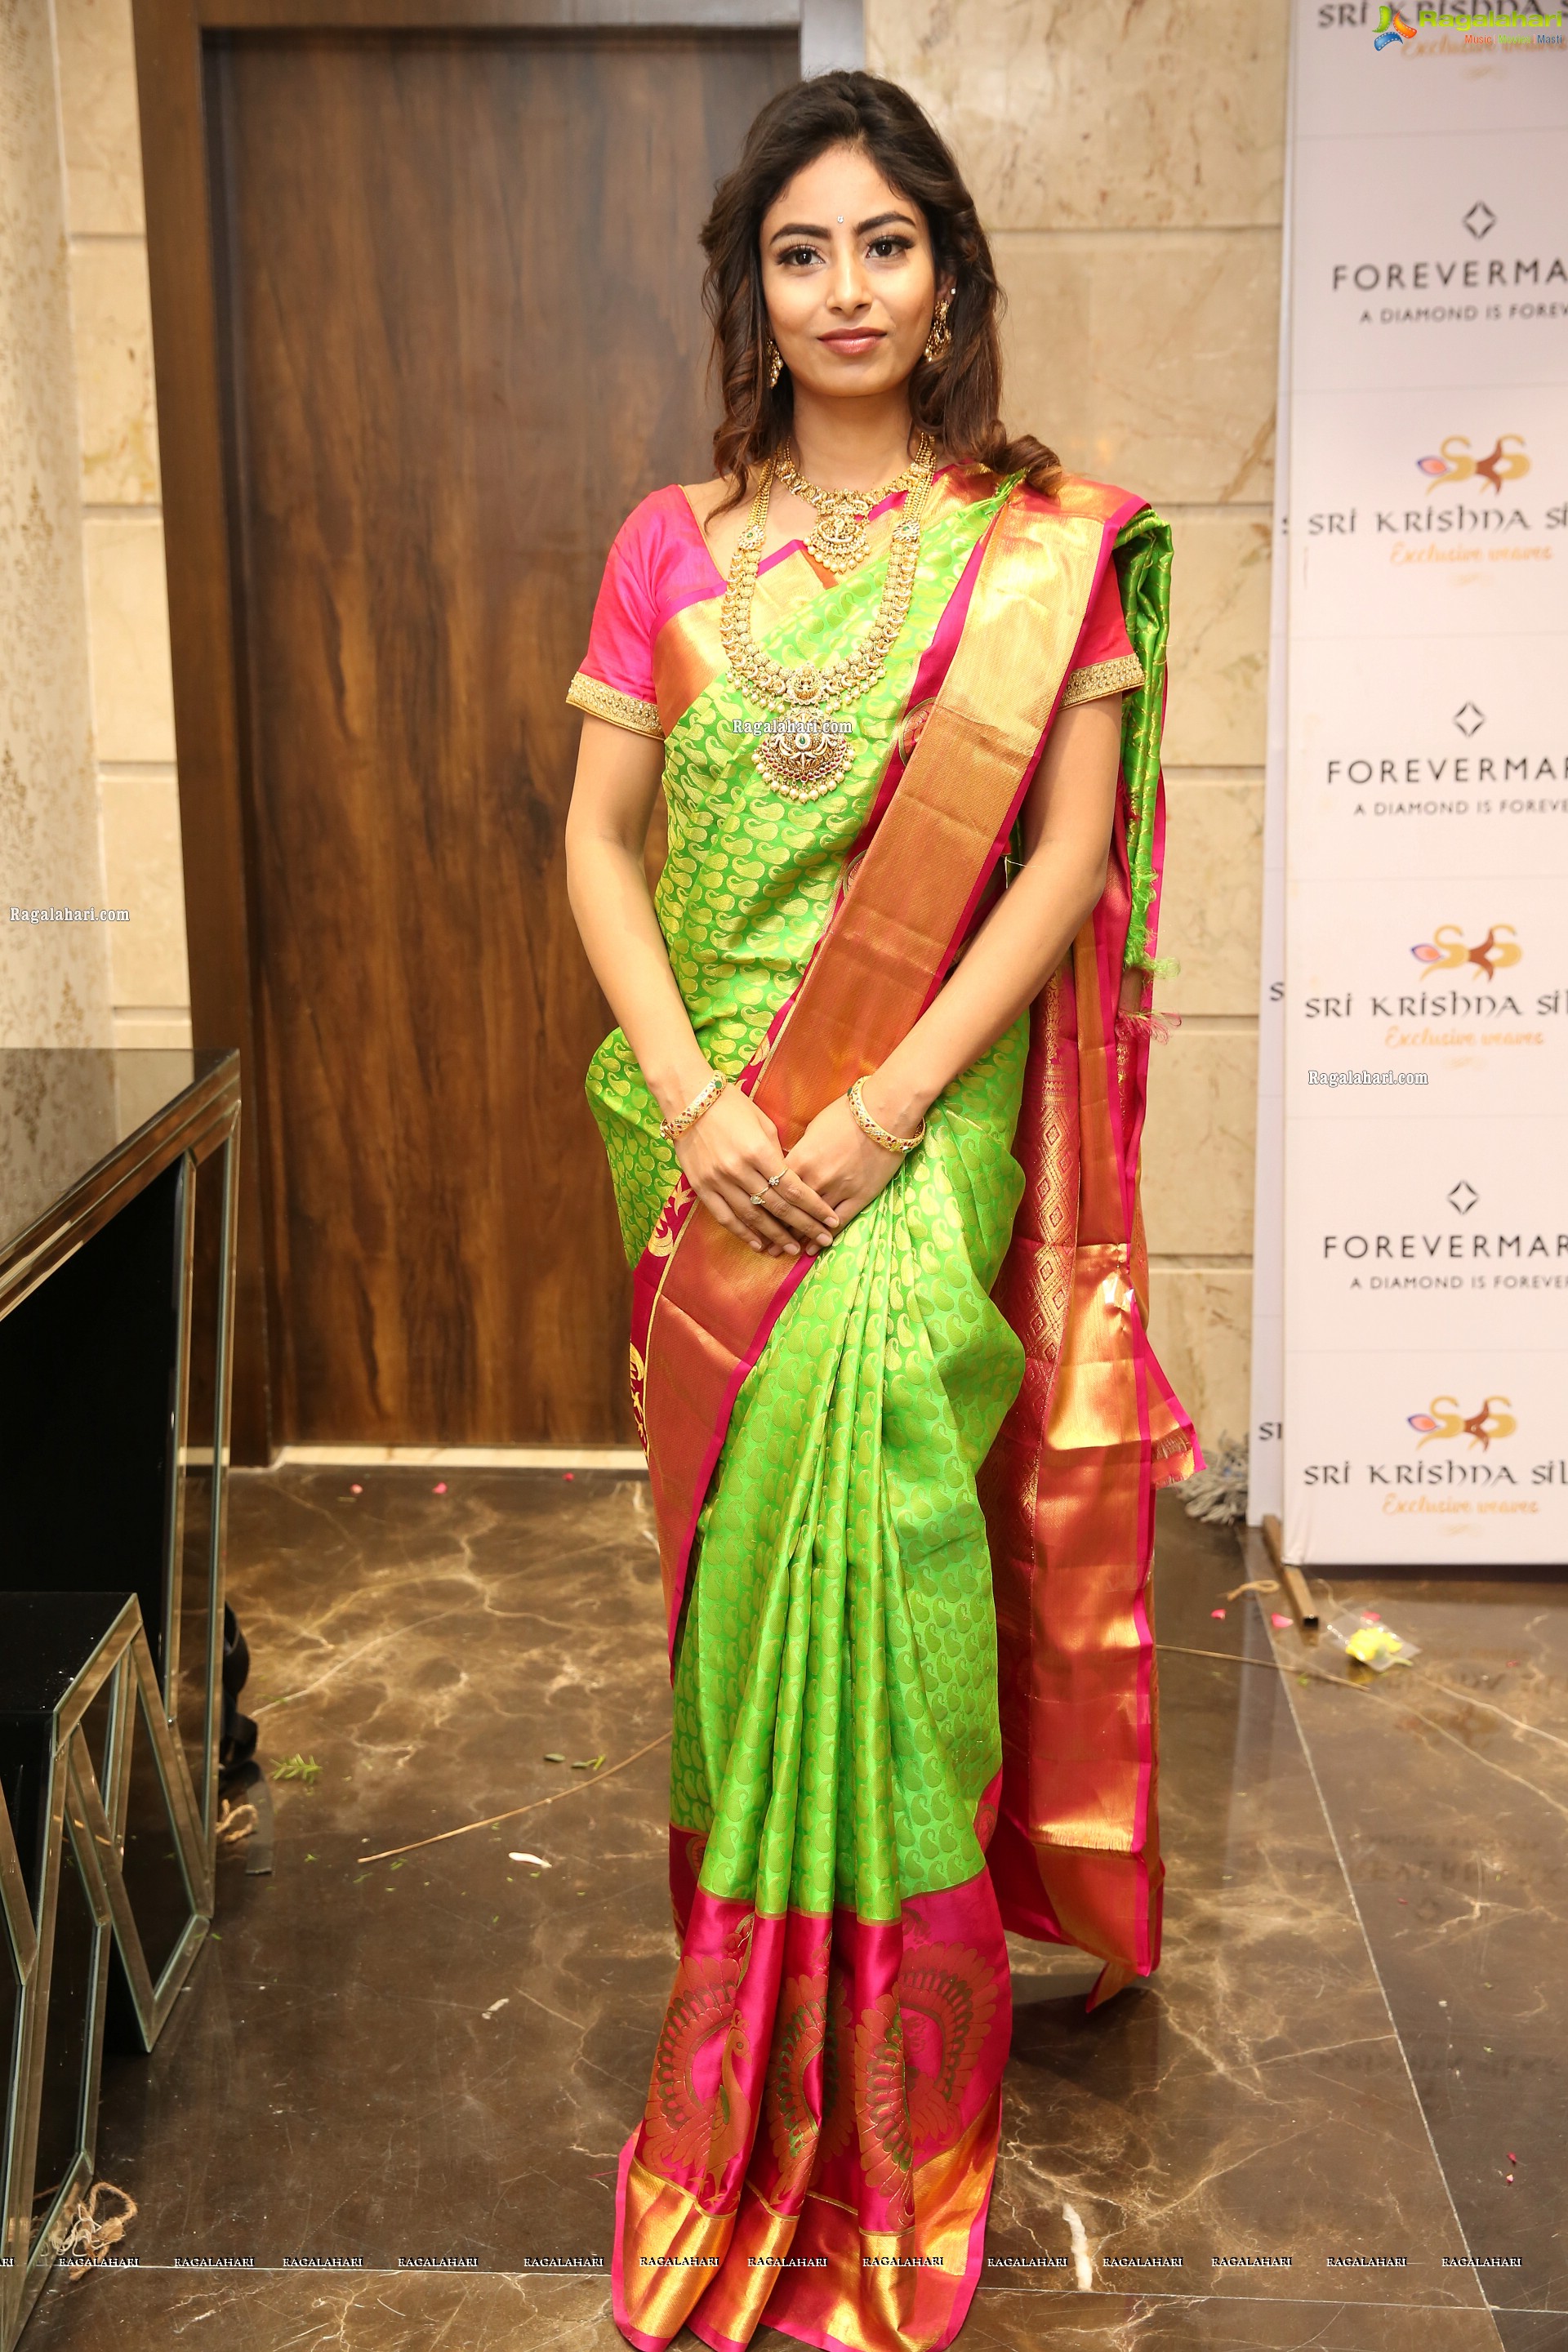 Honey Chowdary at Manepally Jewellers Silverware Section Launch at Its Dilsukhnagar Store - HD Gallery